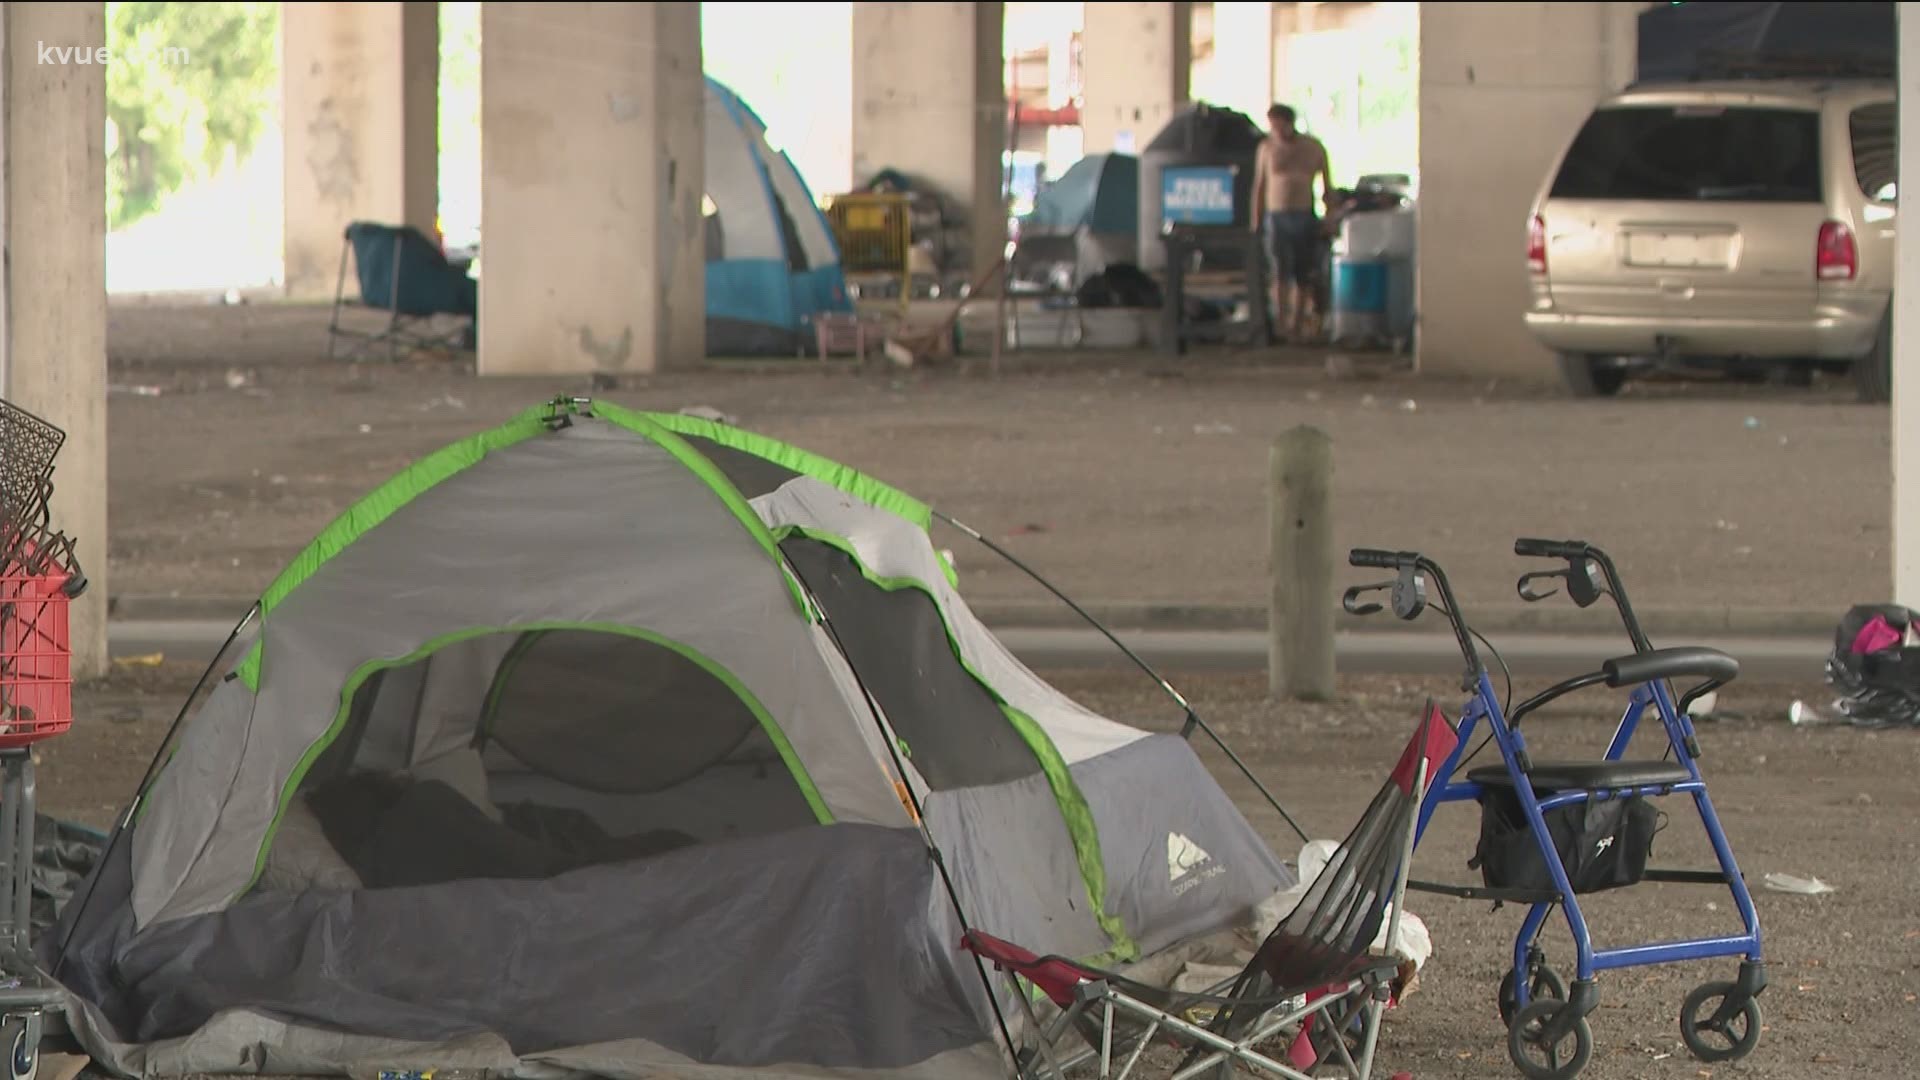 The City of Austin received millions of dollars in grant money to address homelessness. Here is how it was spent.